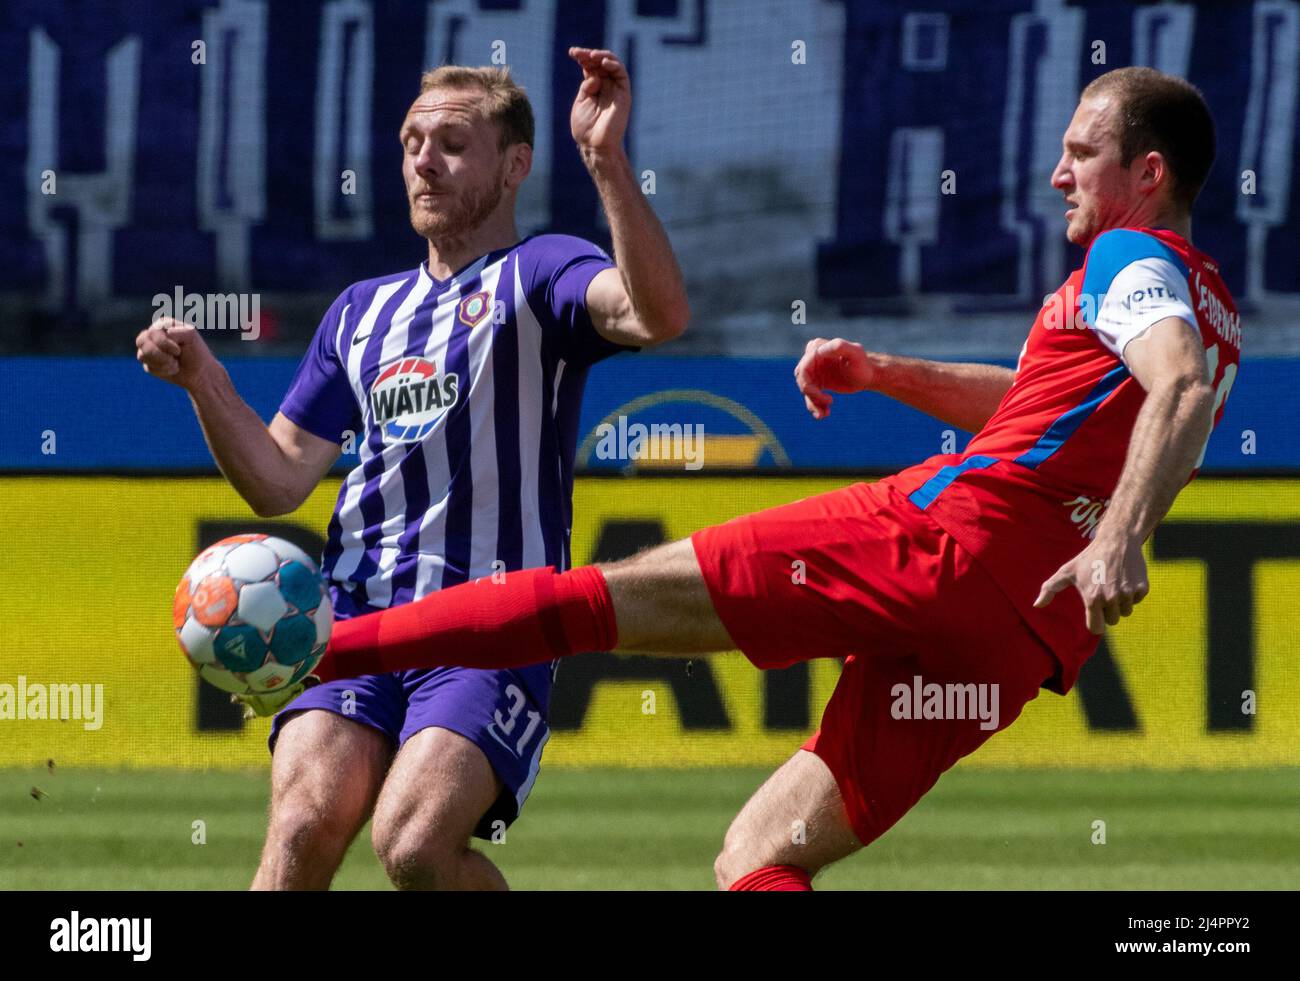 Heidenheim, Germany. 17th Apr, 2022. Soccer: 2nd Bundesliga, 1. FC Heidenheim - Erzgebirge Aue, Matchday 30, Voith Arena. Heidenheim's Jonas Föhrenbach (r) and Aue's Ben Zolinski fight for the ball. Credit: Stefan Puchner/dpa - IMPORTANT NOTE: In accordance with the requirements of the DFL Deutsche Fußball Liga and the DFB Deutscher Fußball-Bund, it is prohibited to use or have used photographs taken in the stadium and/or of the match in the form of sequence pictures and/or video-like photo series./dpa/Alamy Live News Stock Photo